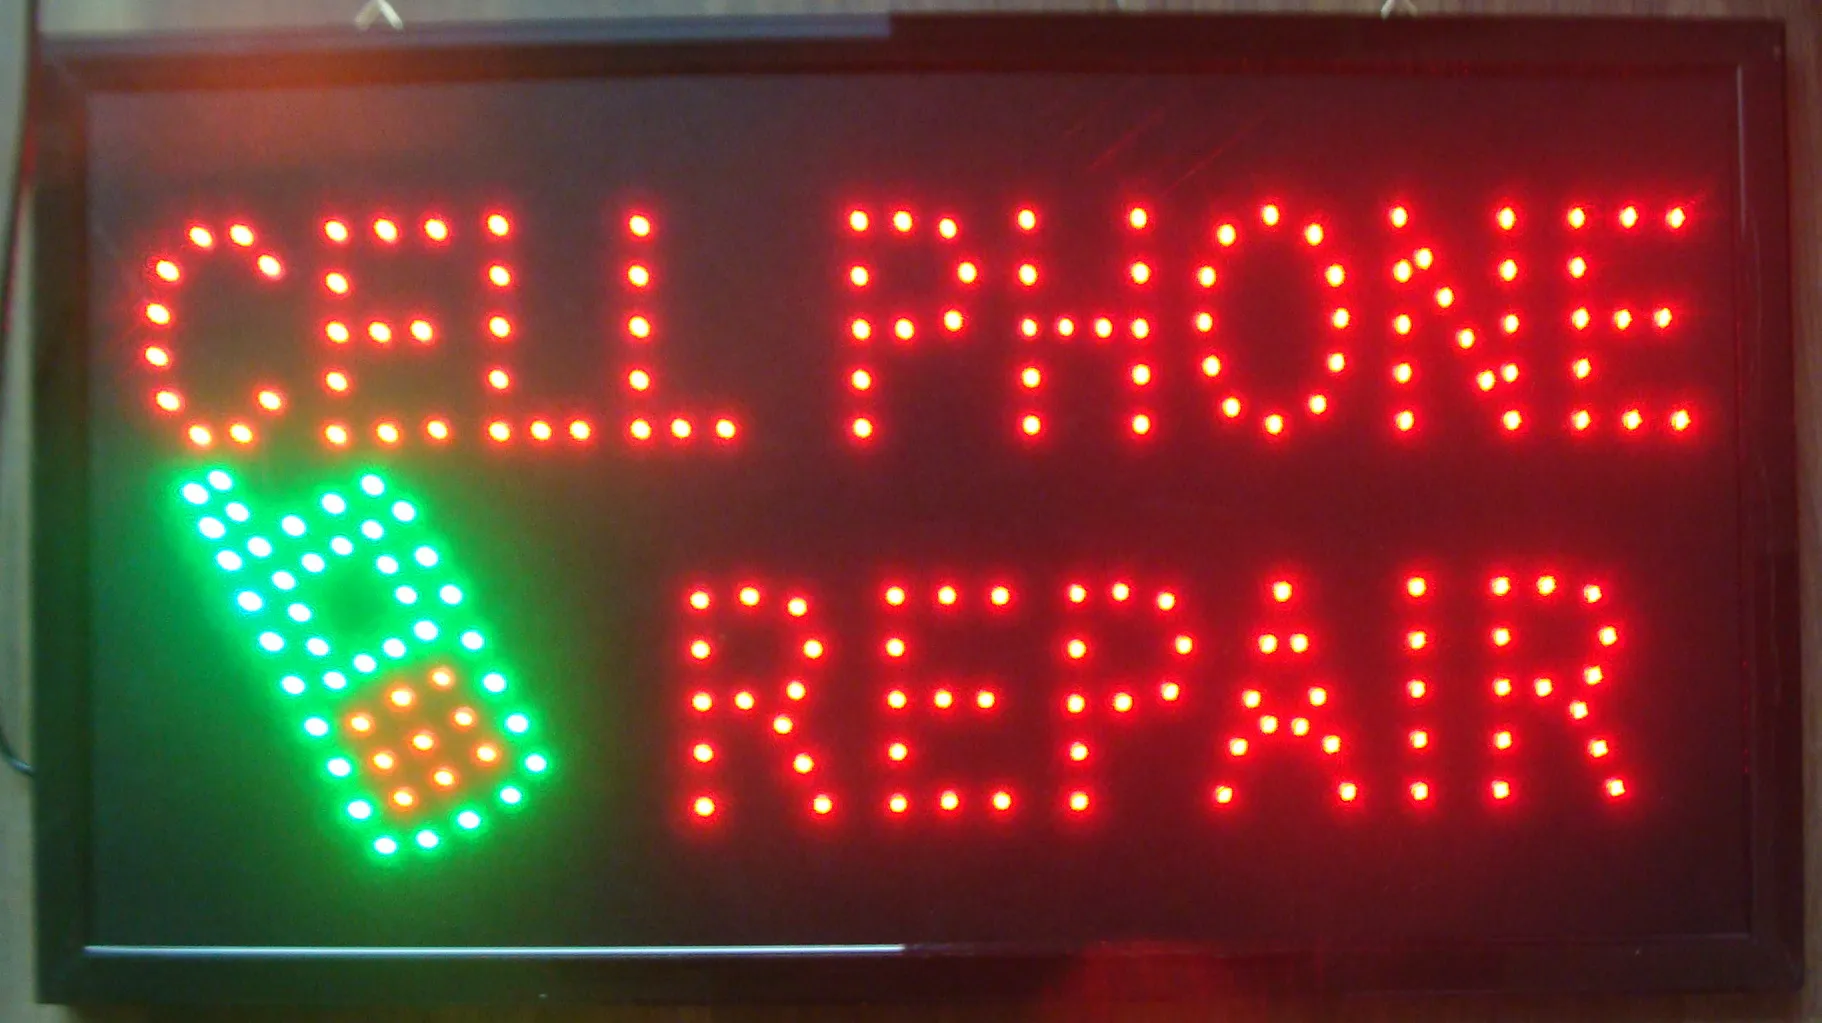 Hot sale ultra bright led neon sign cell phone repair animated neon cell phone repair shop open size 19 x 10 inch